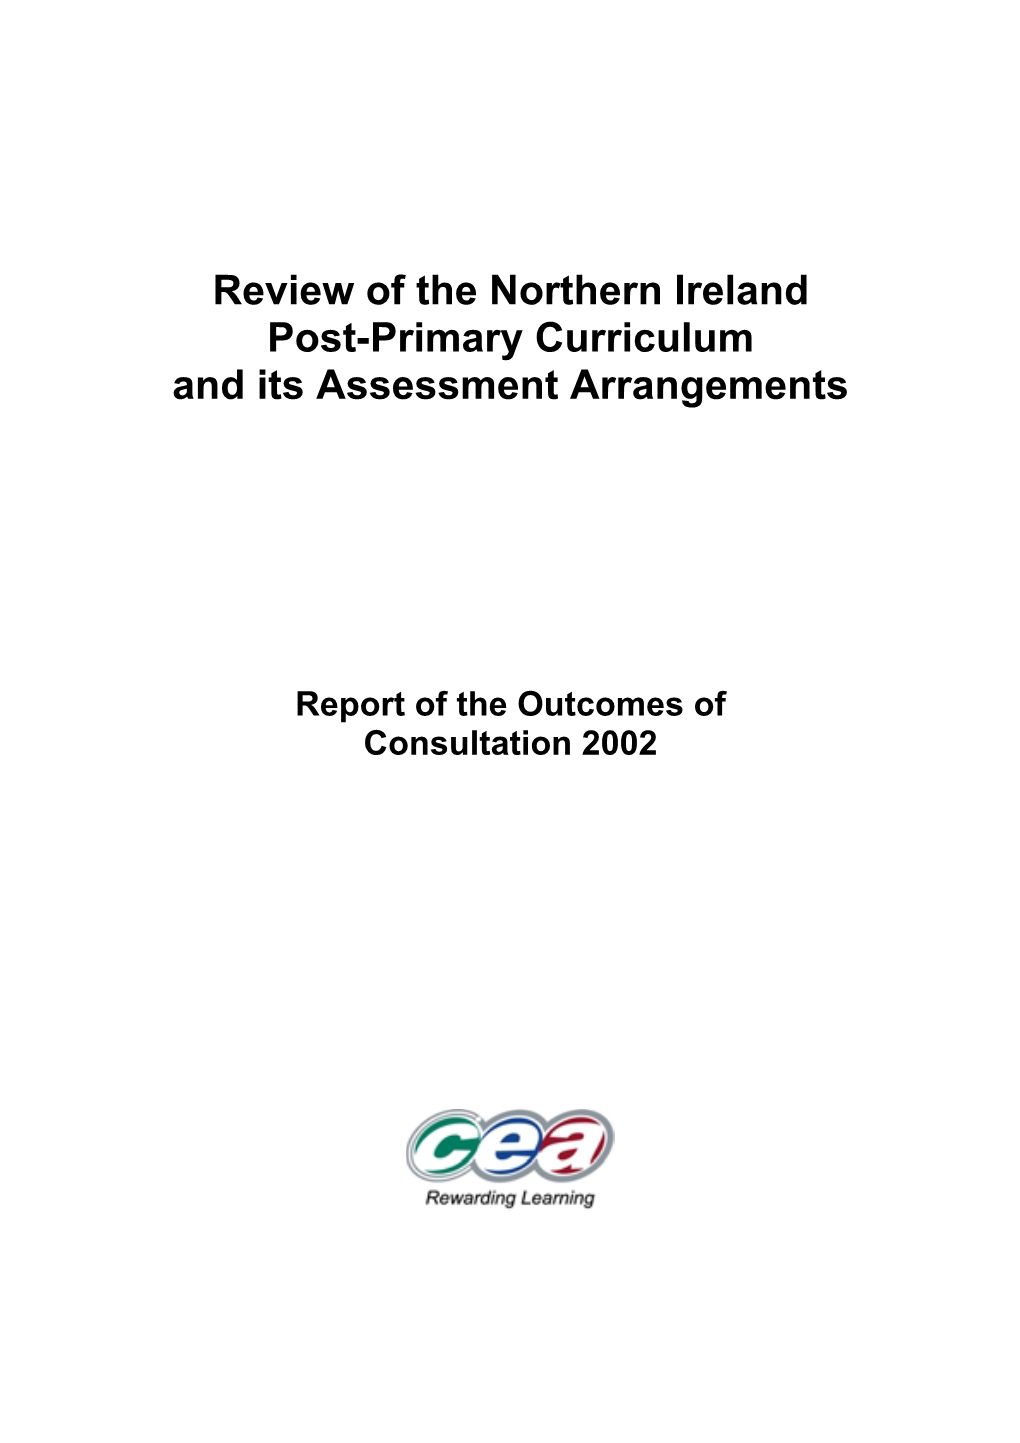 Review of the Northern Ireland Post-Primary Curriculum and Its Assessment Arrangements